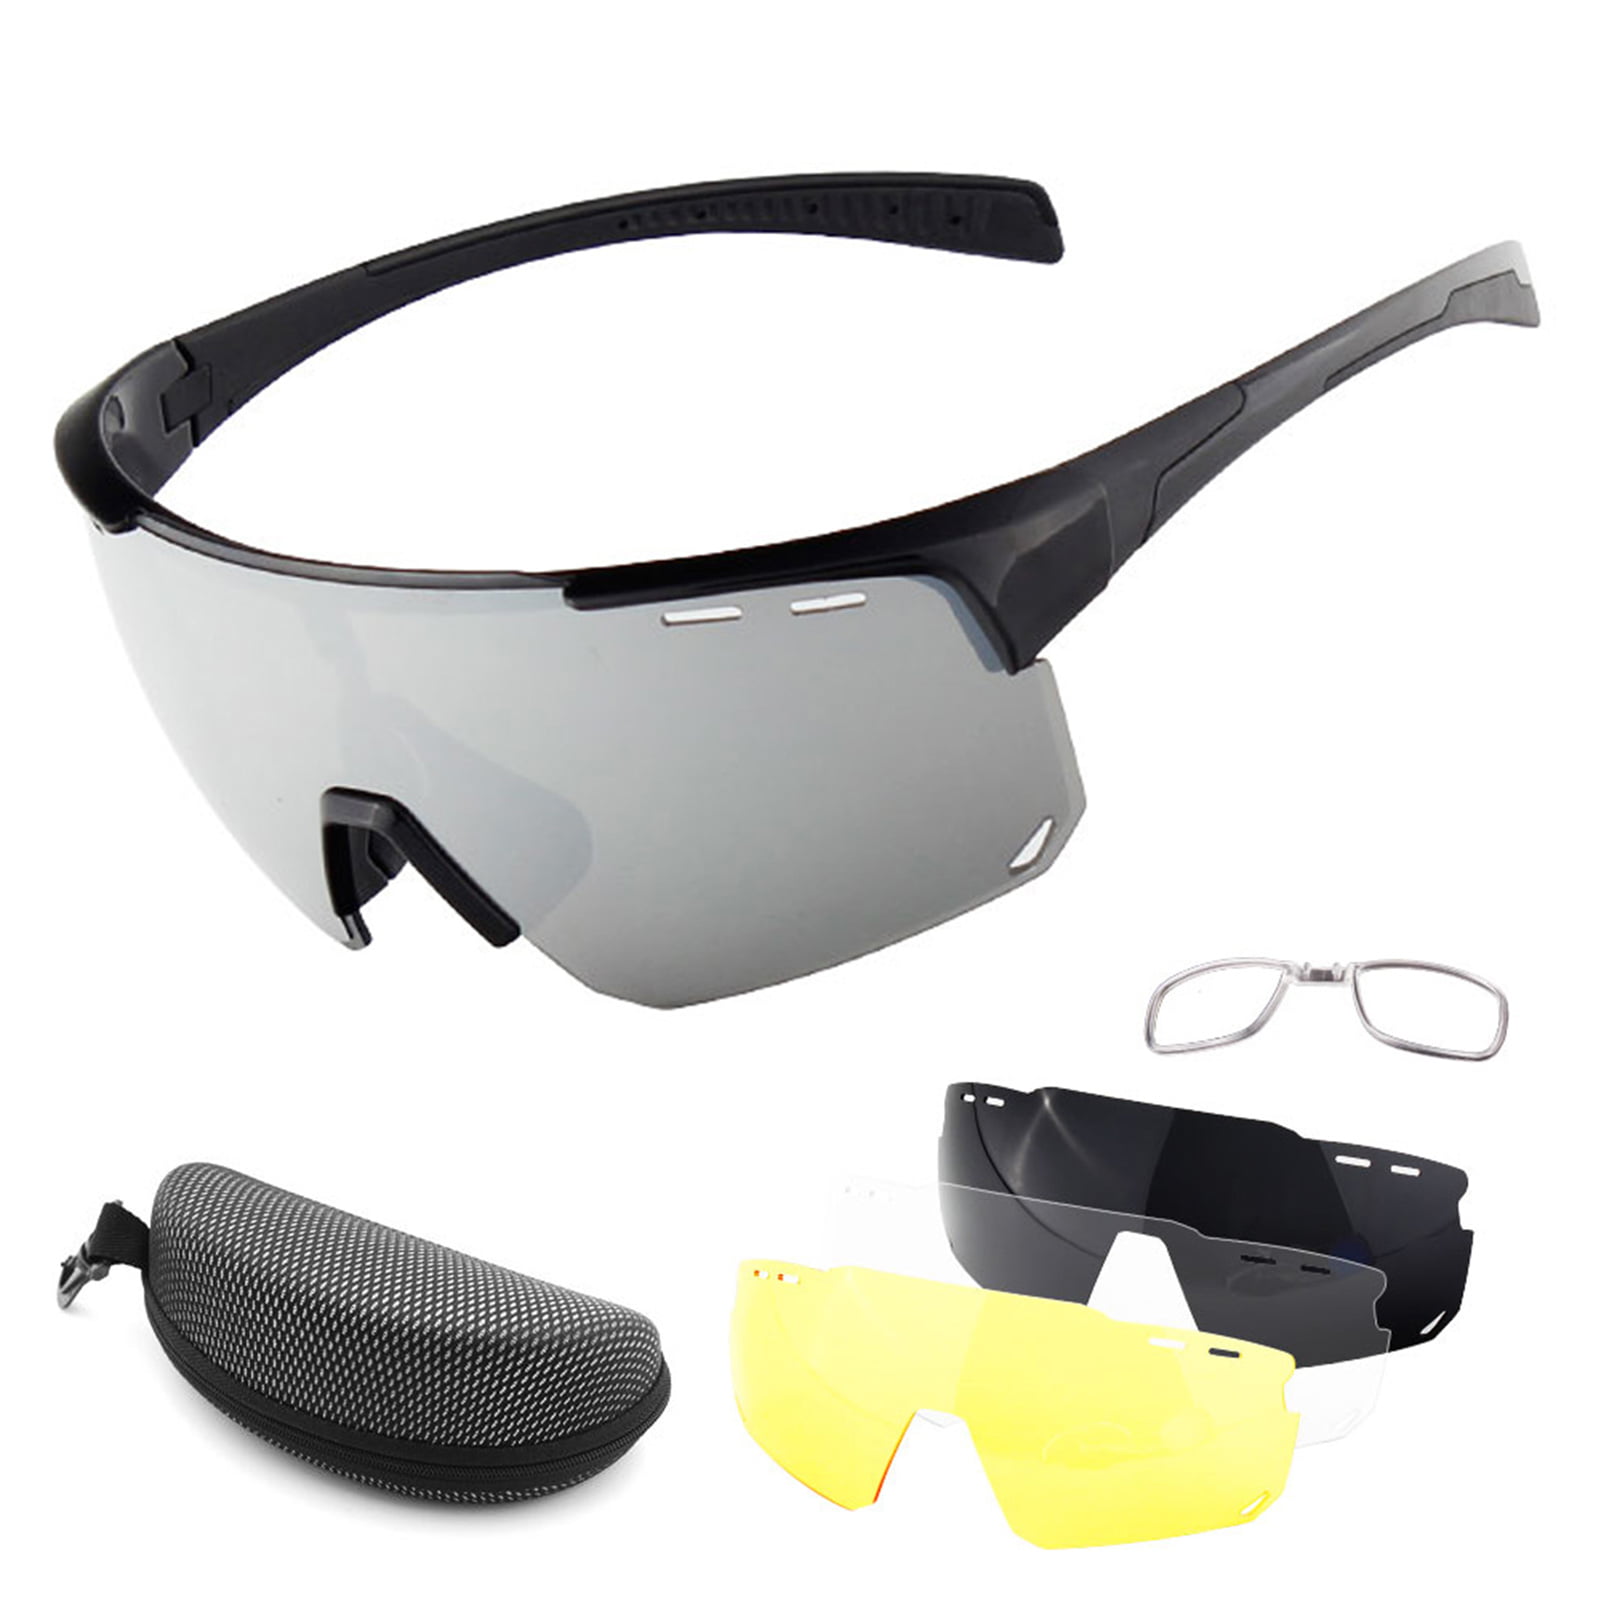 KRSCT Polarized Sports Sunglasses with 3 Interchangeable Lenses UV400 Protection Sports Sunglasses for Cycling Running Glasses 